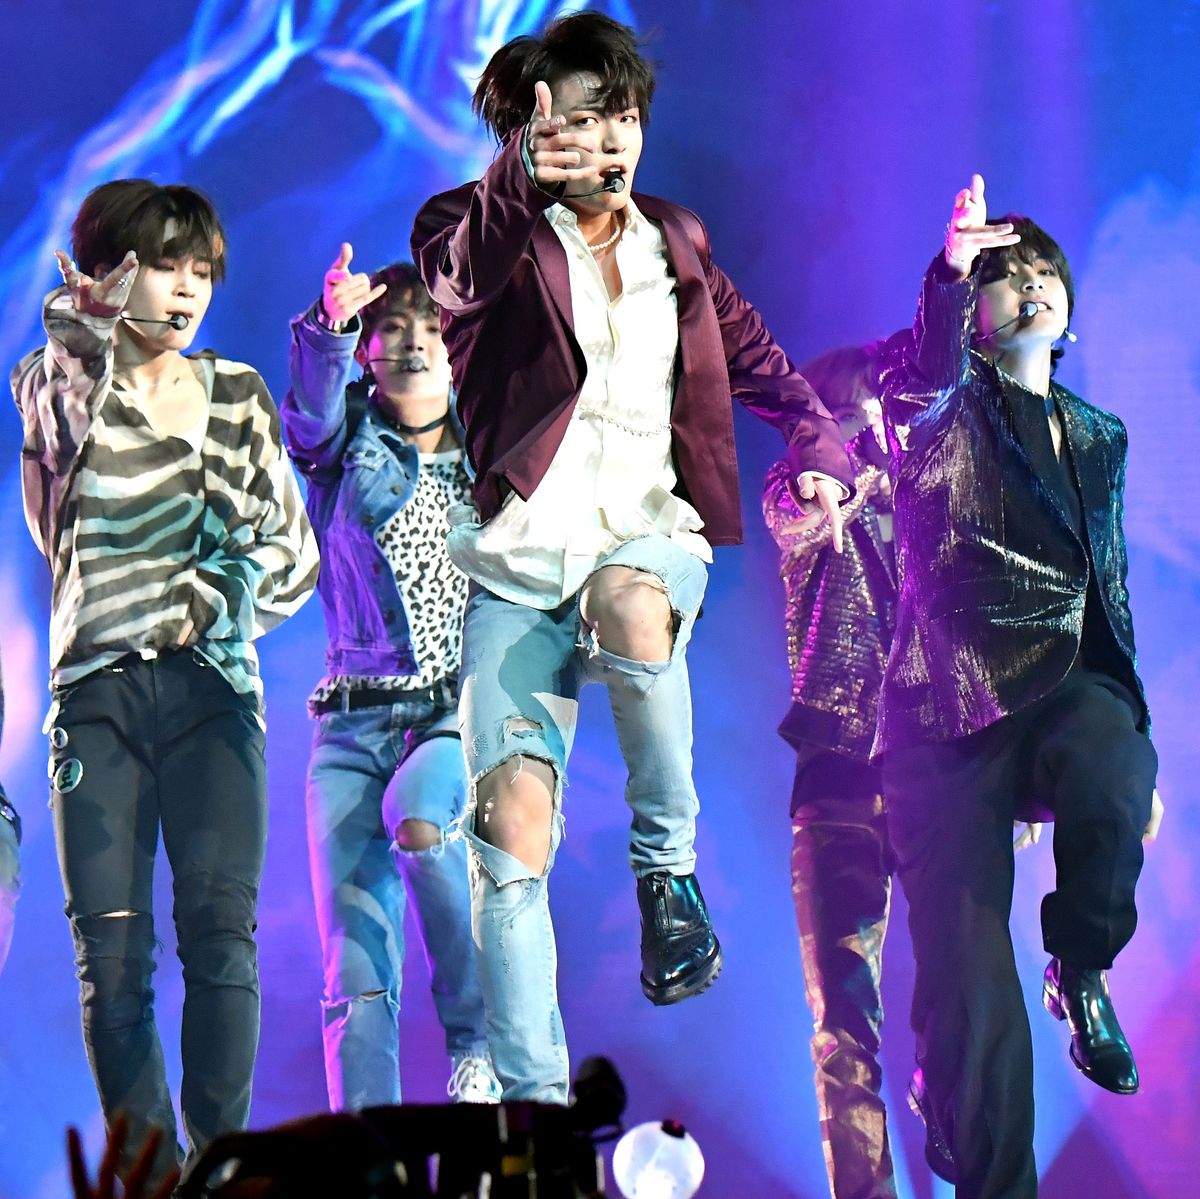 A Deeper Look At Why Bts Has Thrived In America